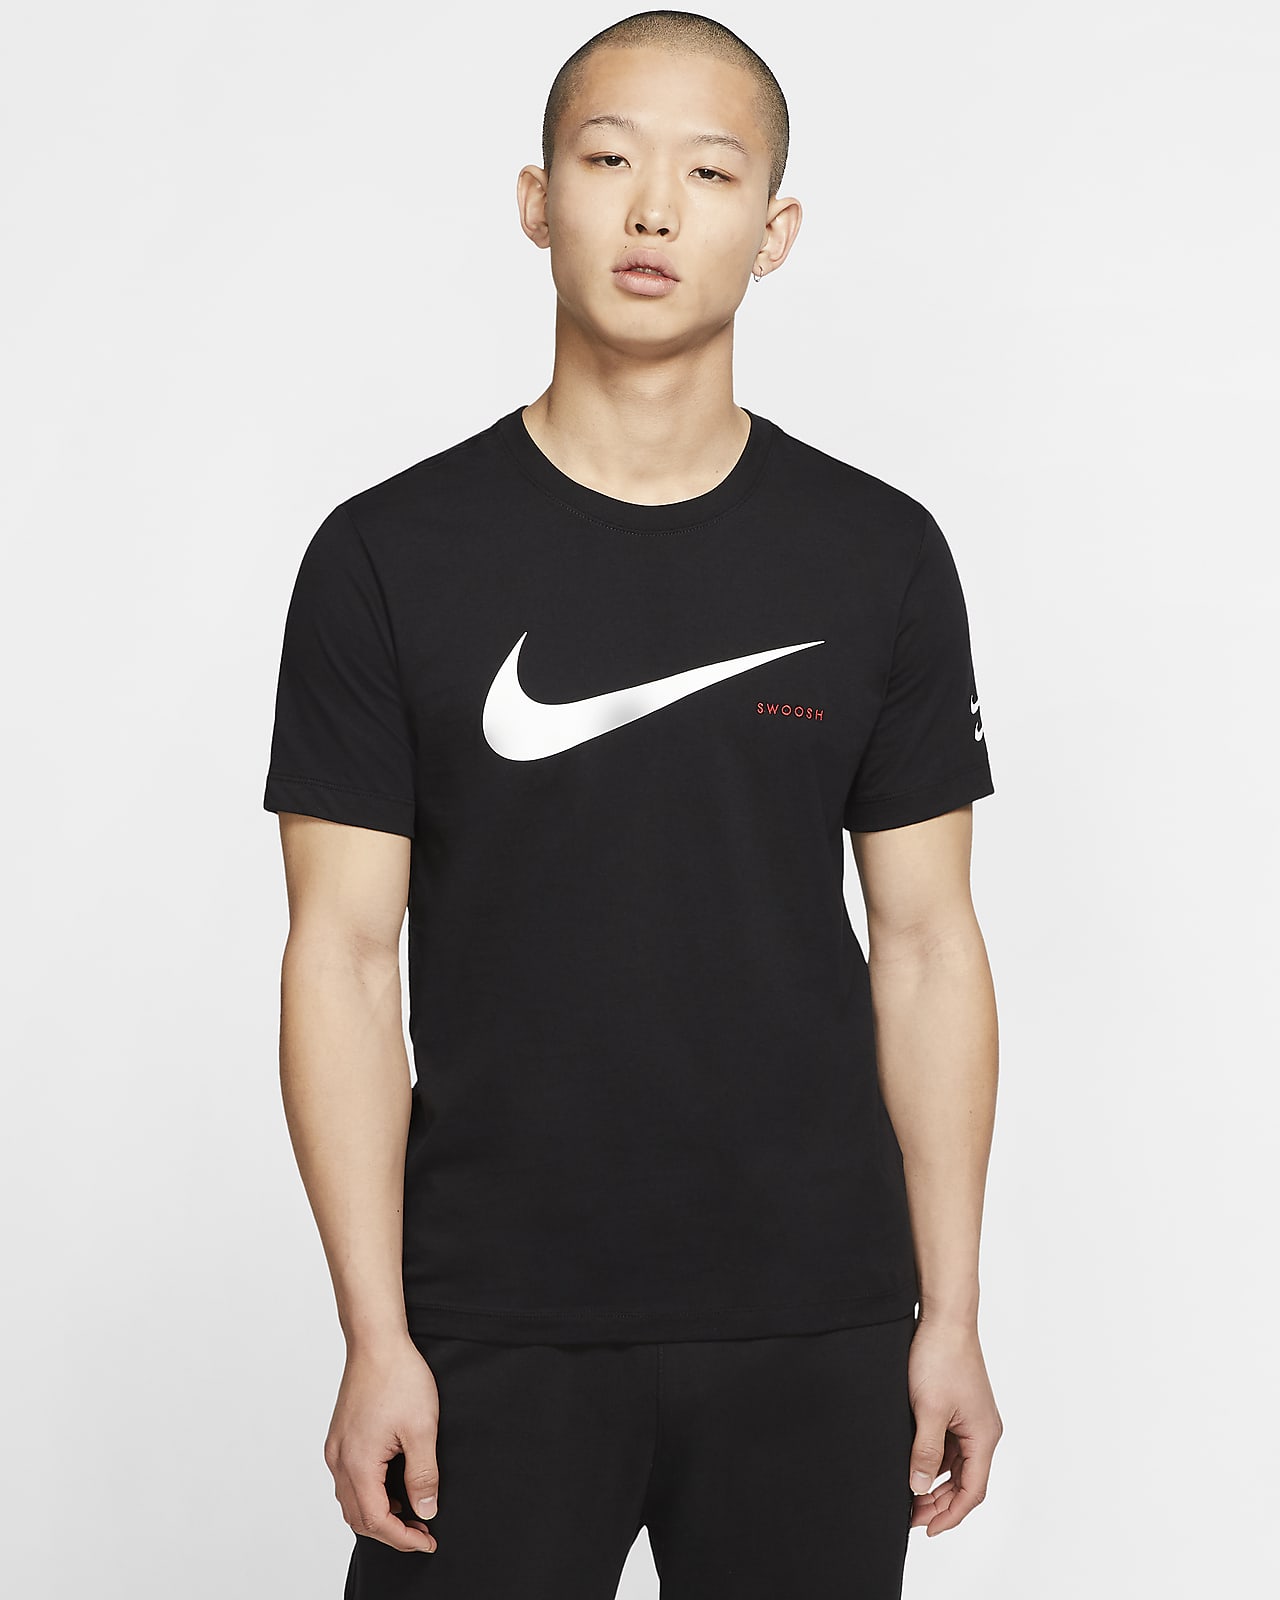 Angry explain stereo nike sportswear swoosh t shirt Long pink cliff